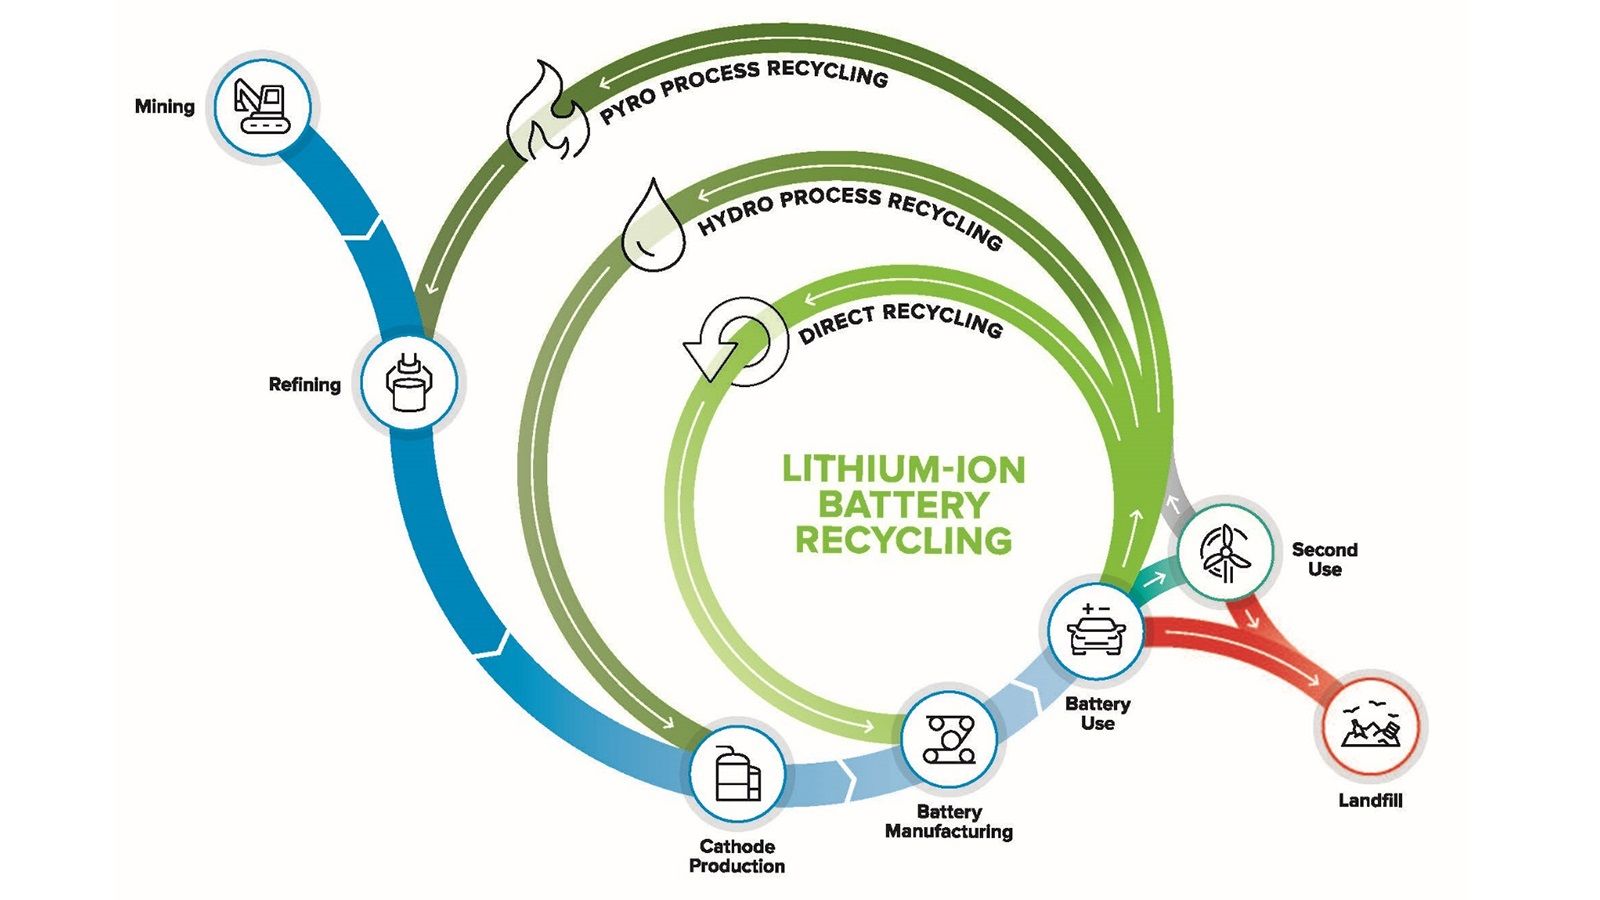 Benefits, challenges, and solutions of recycling electric vehicle